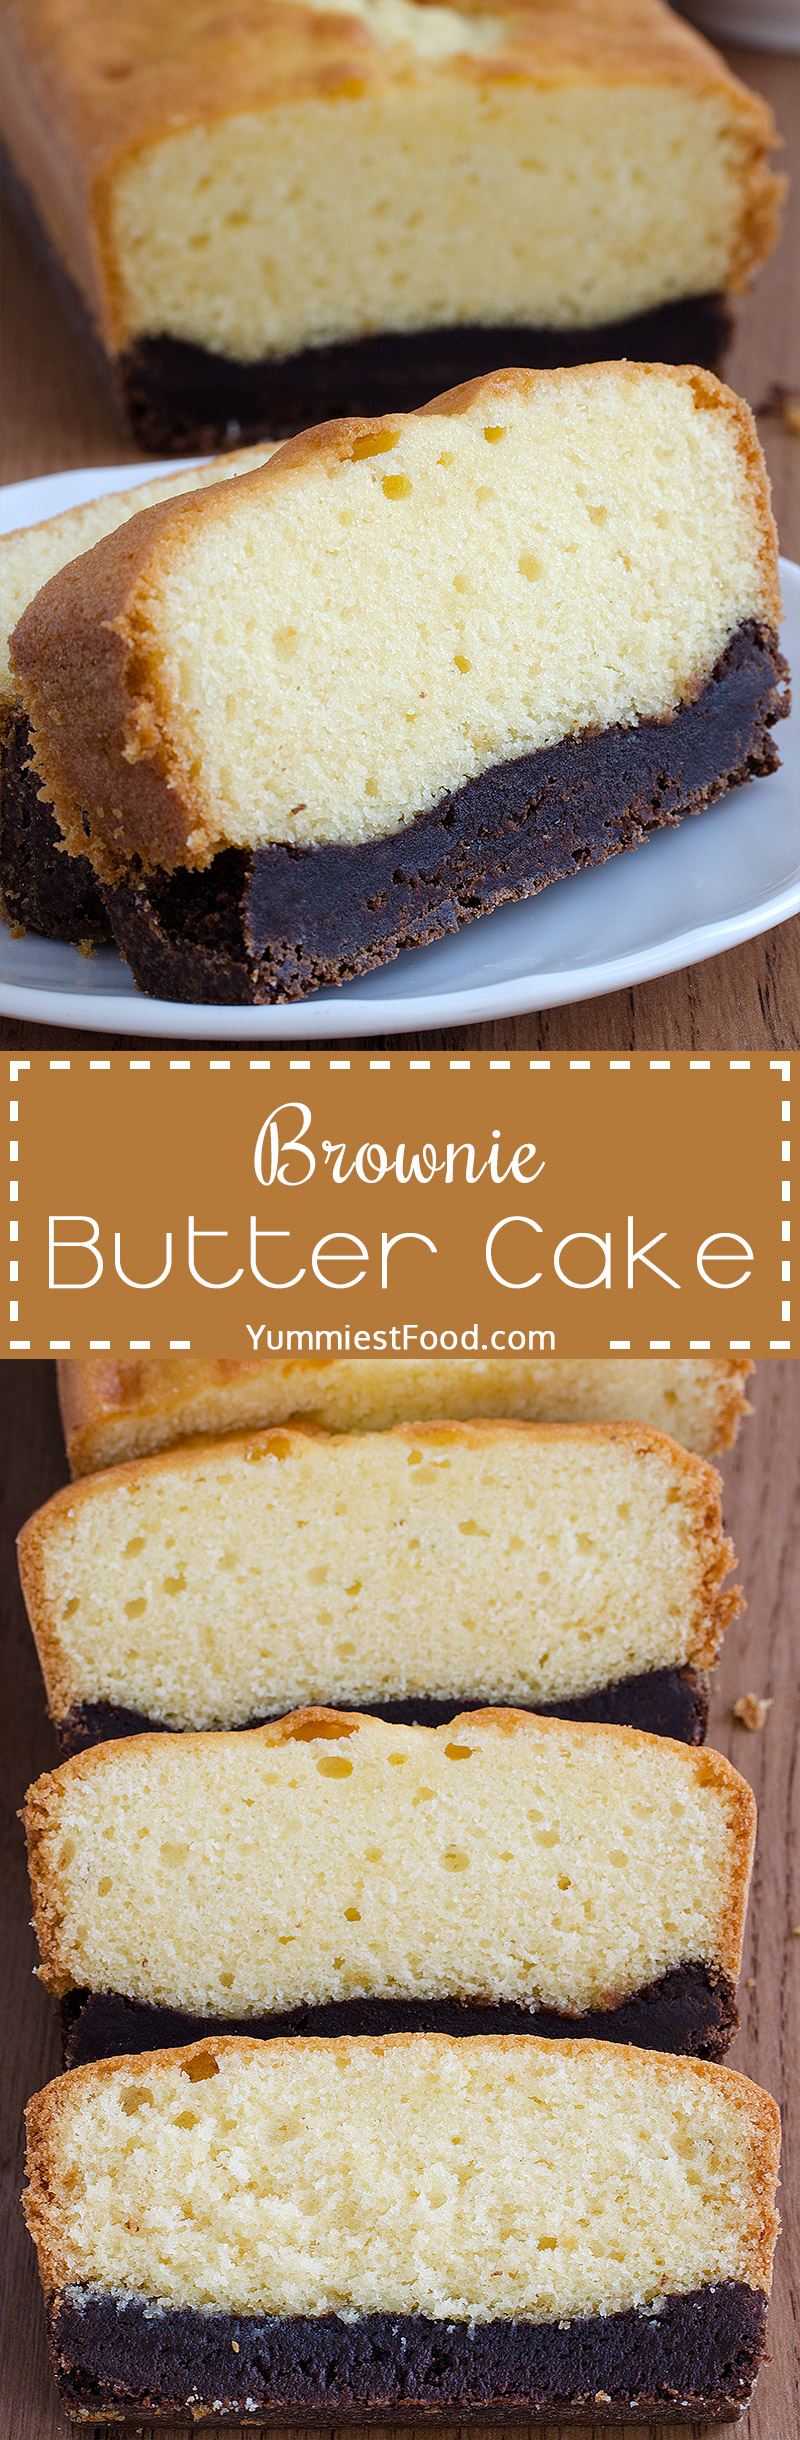 Brownie Butter Cake - delicious, sweet and perfectly moist